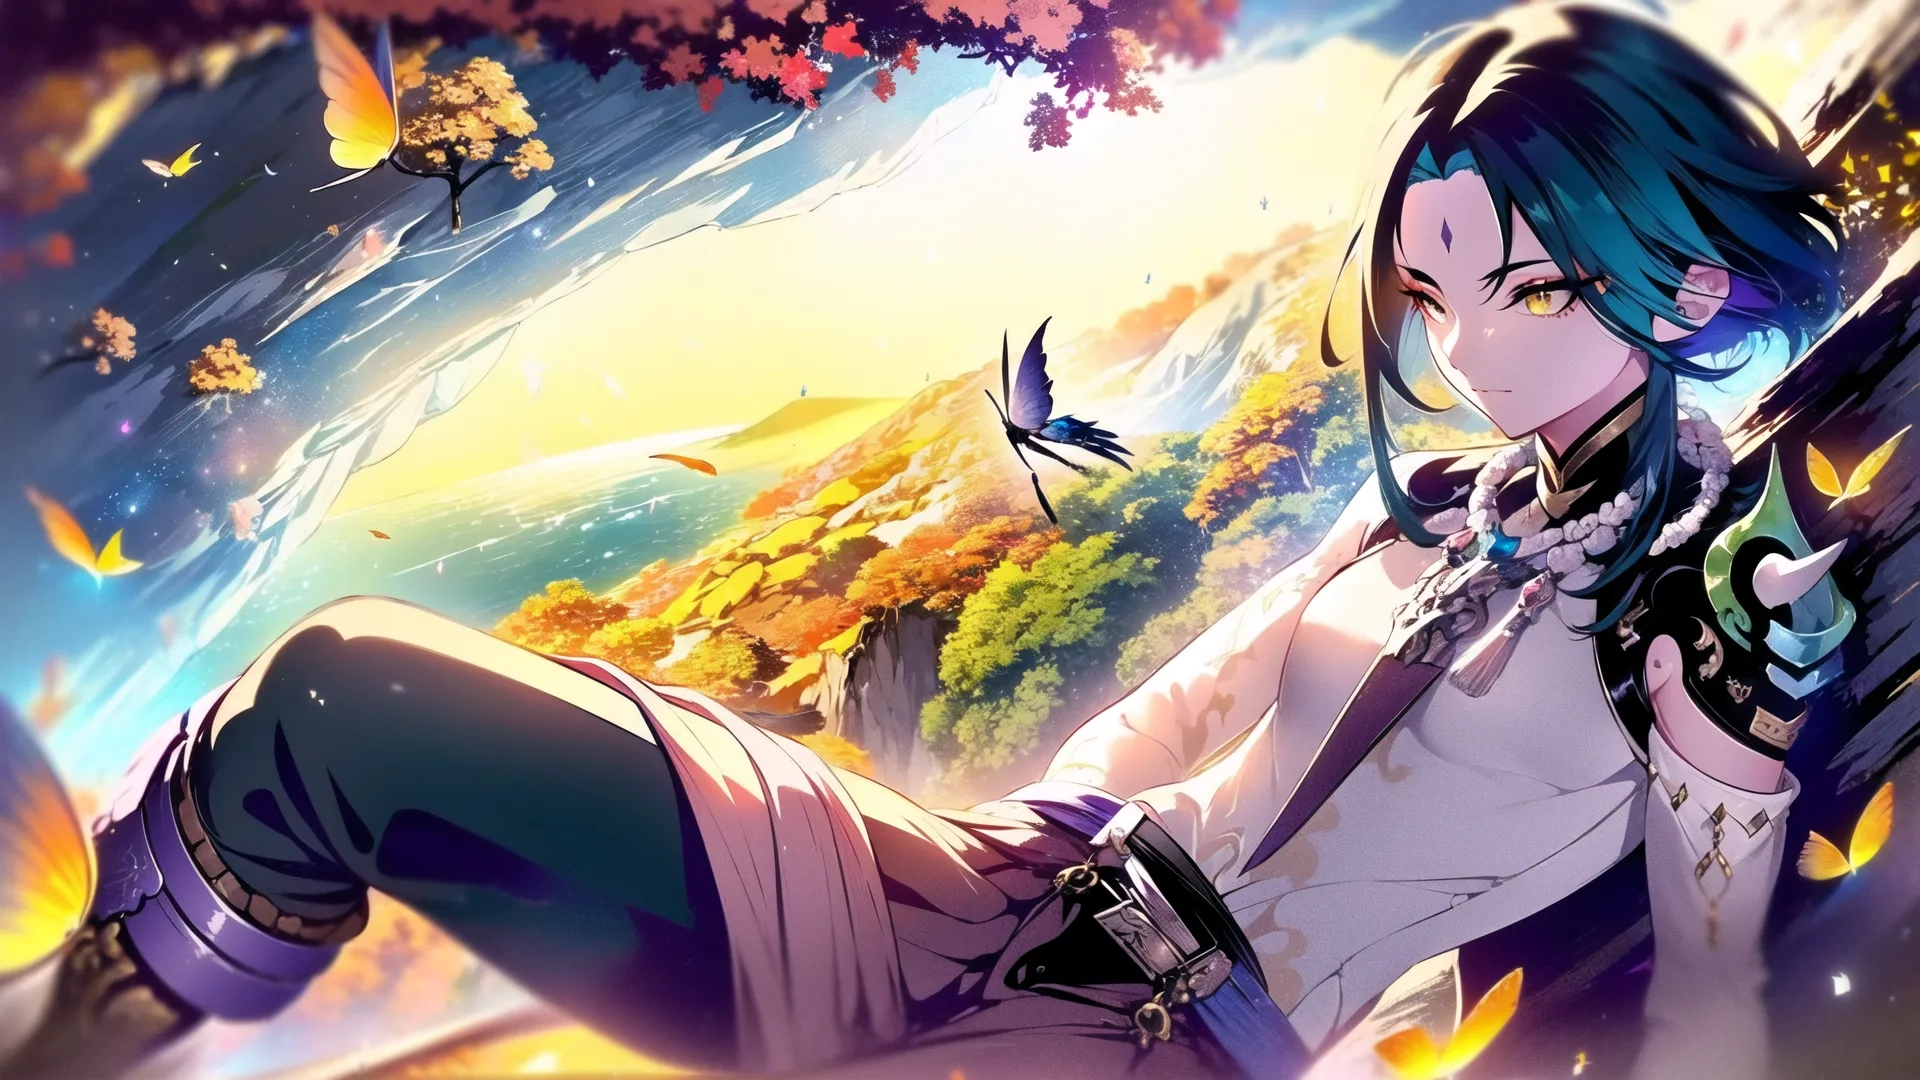 anime style character with long hair and big breast and a shotgun in her hands, on a hill near the ocean and flying birds below her back
